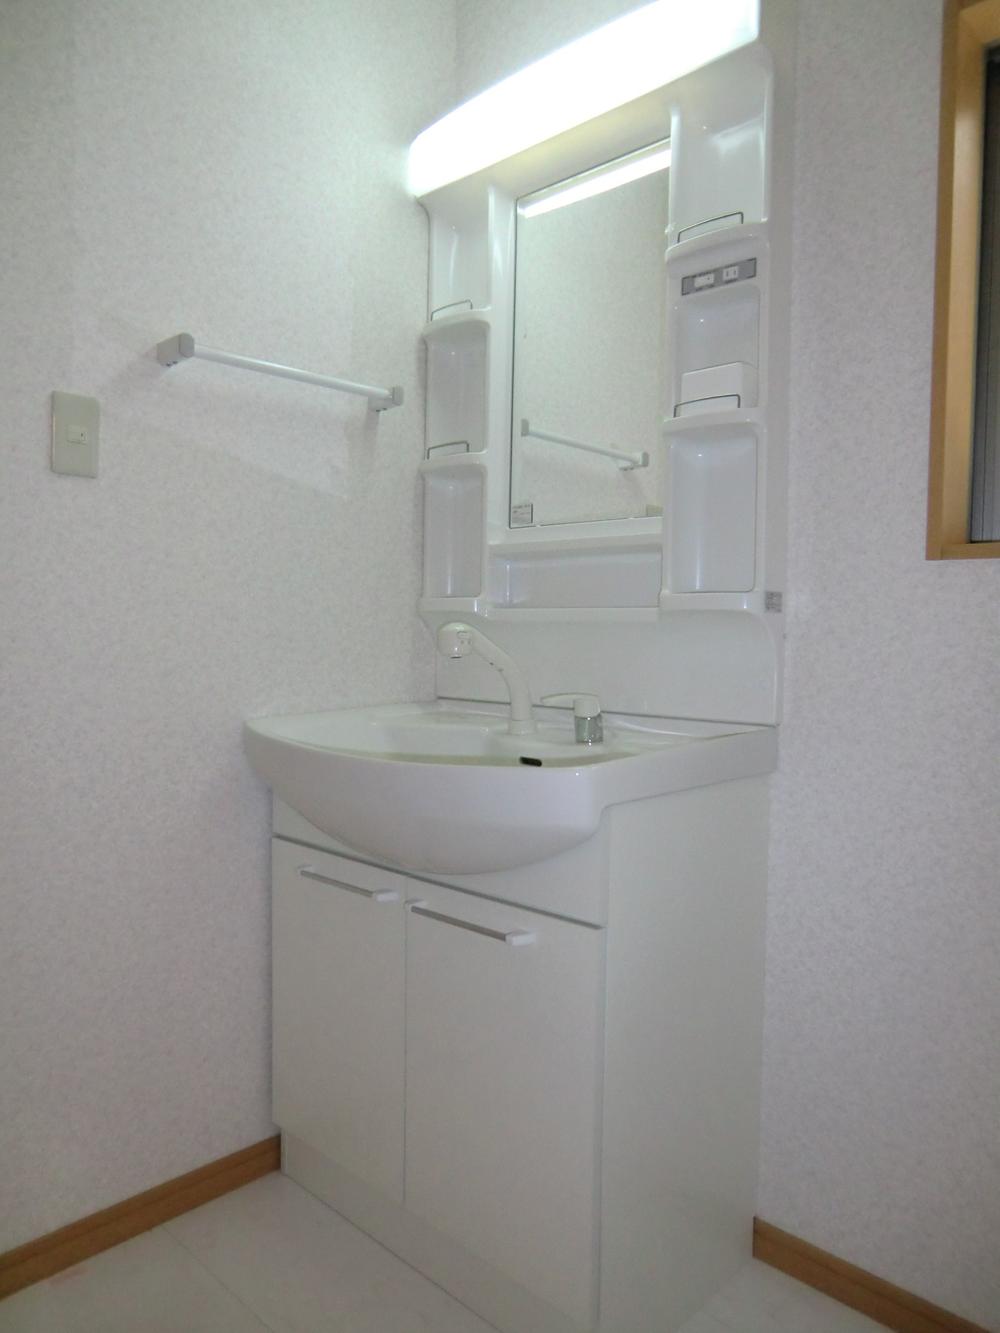 Other Equipment. Same specifications photos (basin)